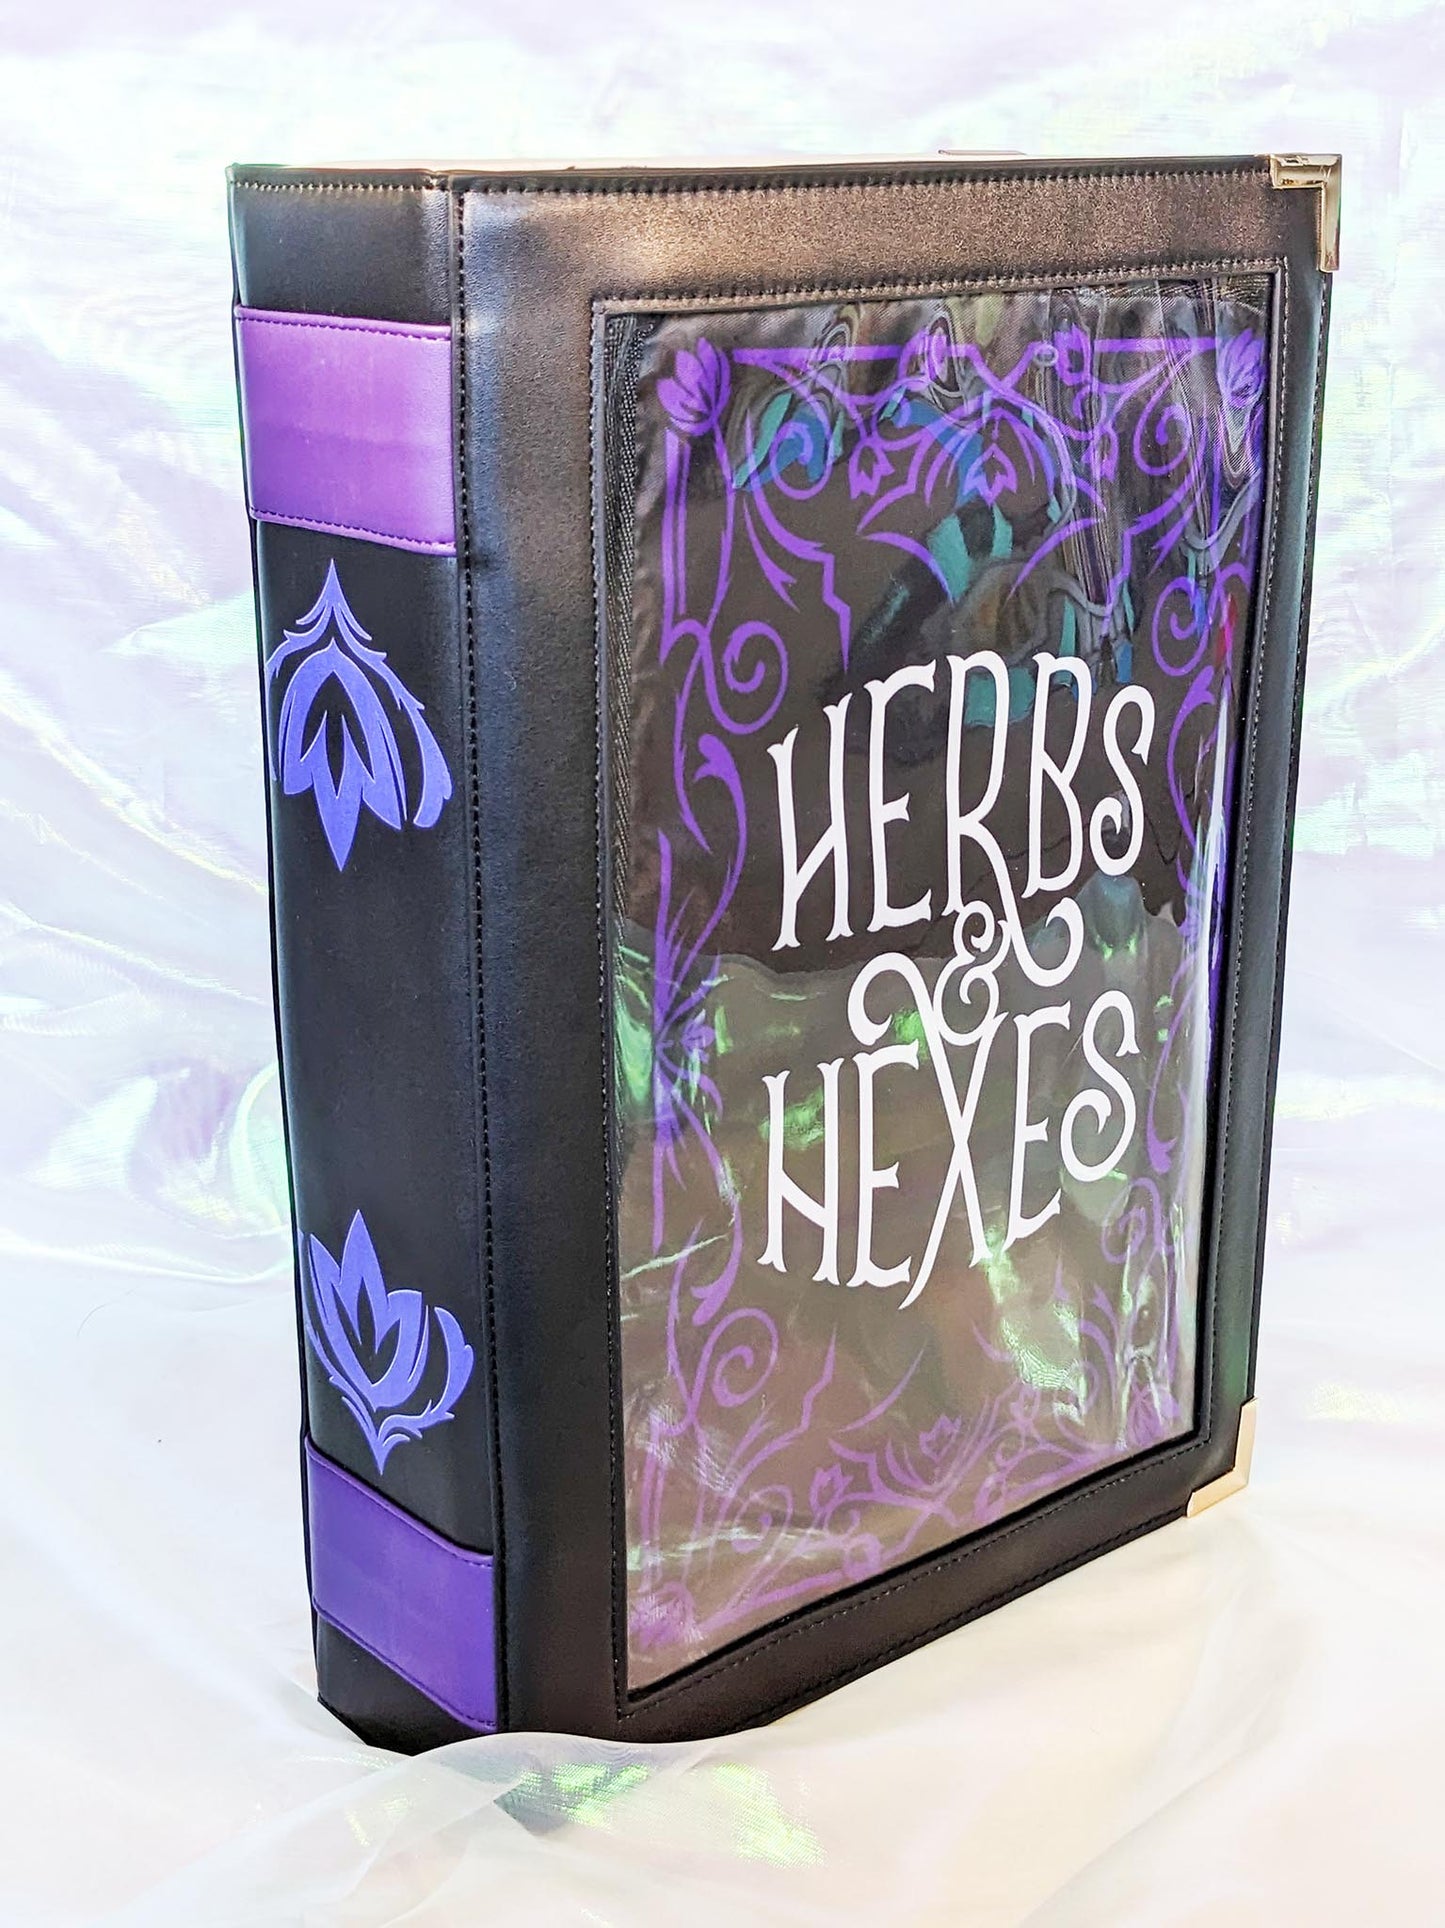 Bookish Ita Messenger Laptop Bag Backpack in Witchy Black Purple Herbs and Hexes